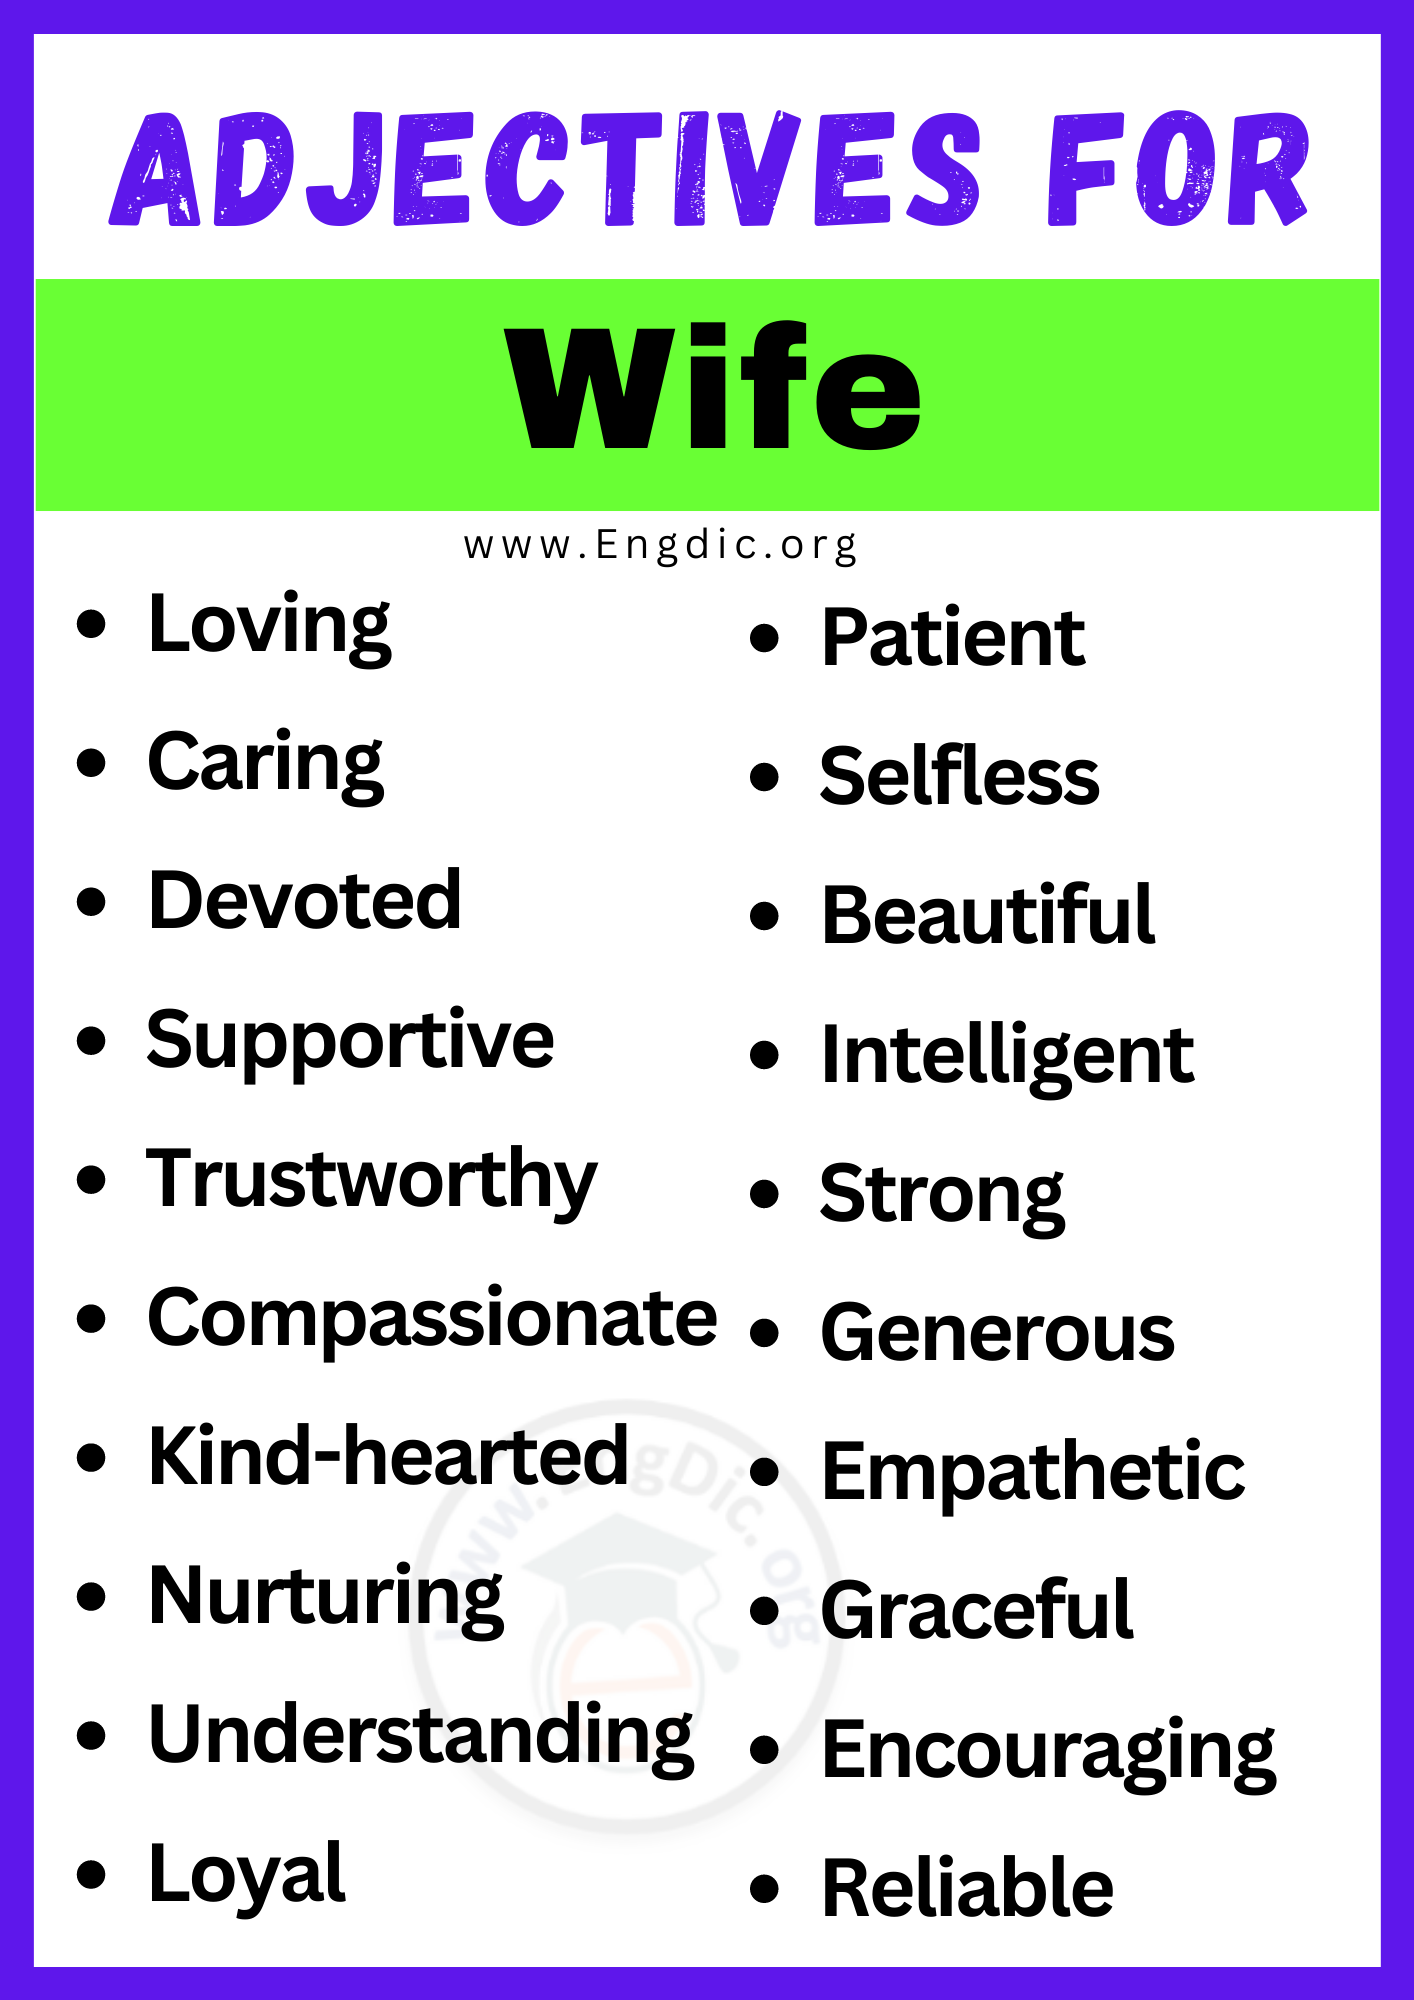 Adjectives for Wife